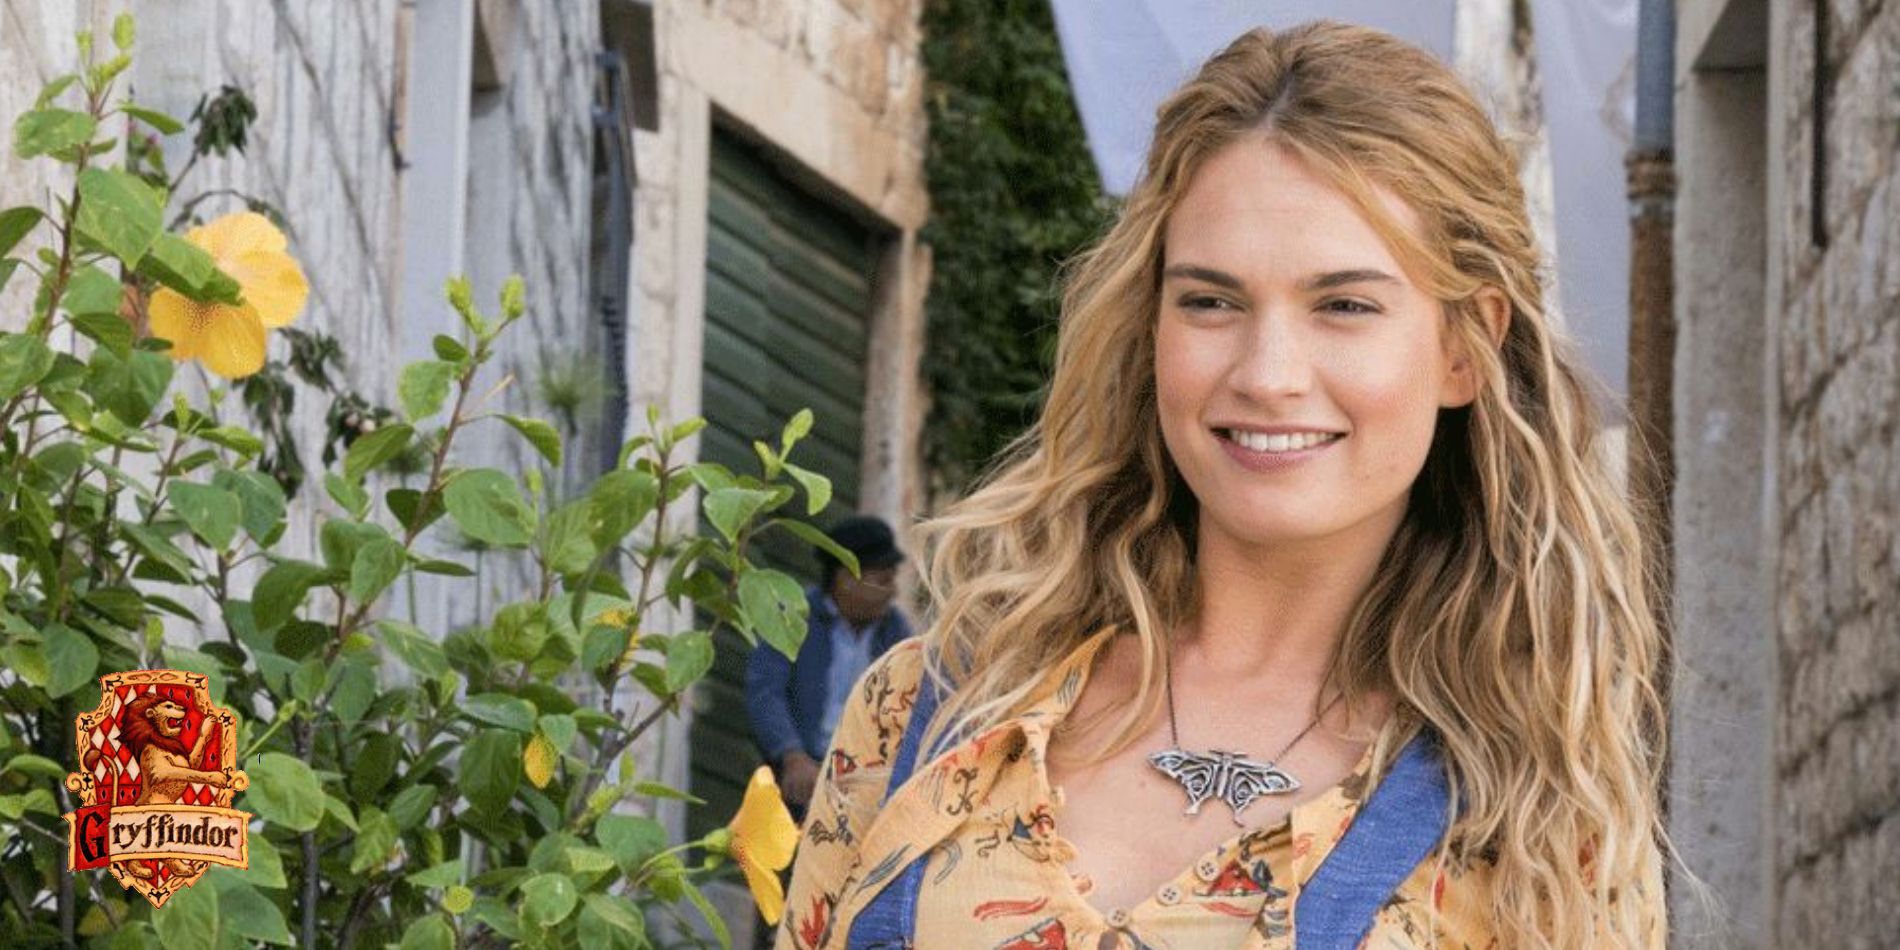 https://static1.srcdn.com/wordpress/wp-content/uploads/2019/08/Lily-James-As-Donne-In-Mamma-Mia-Here-We-Go-Again-Gryffindor.jpg